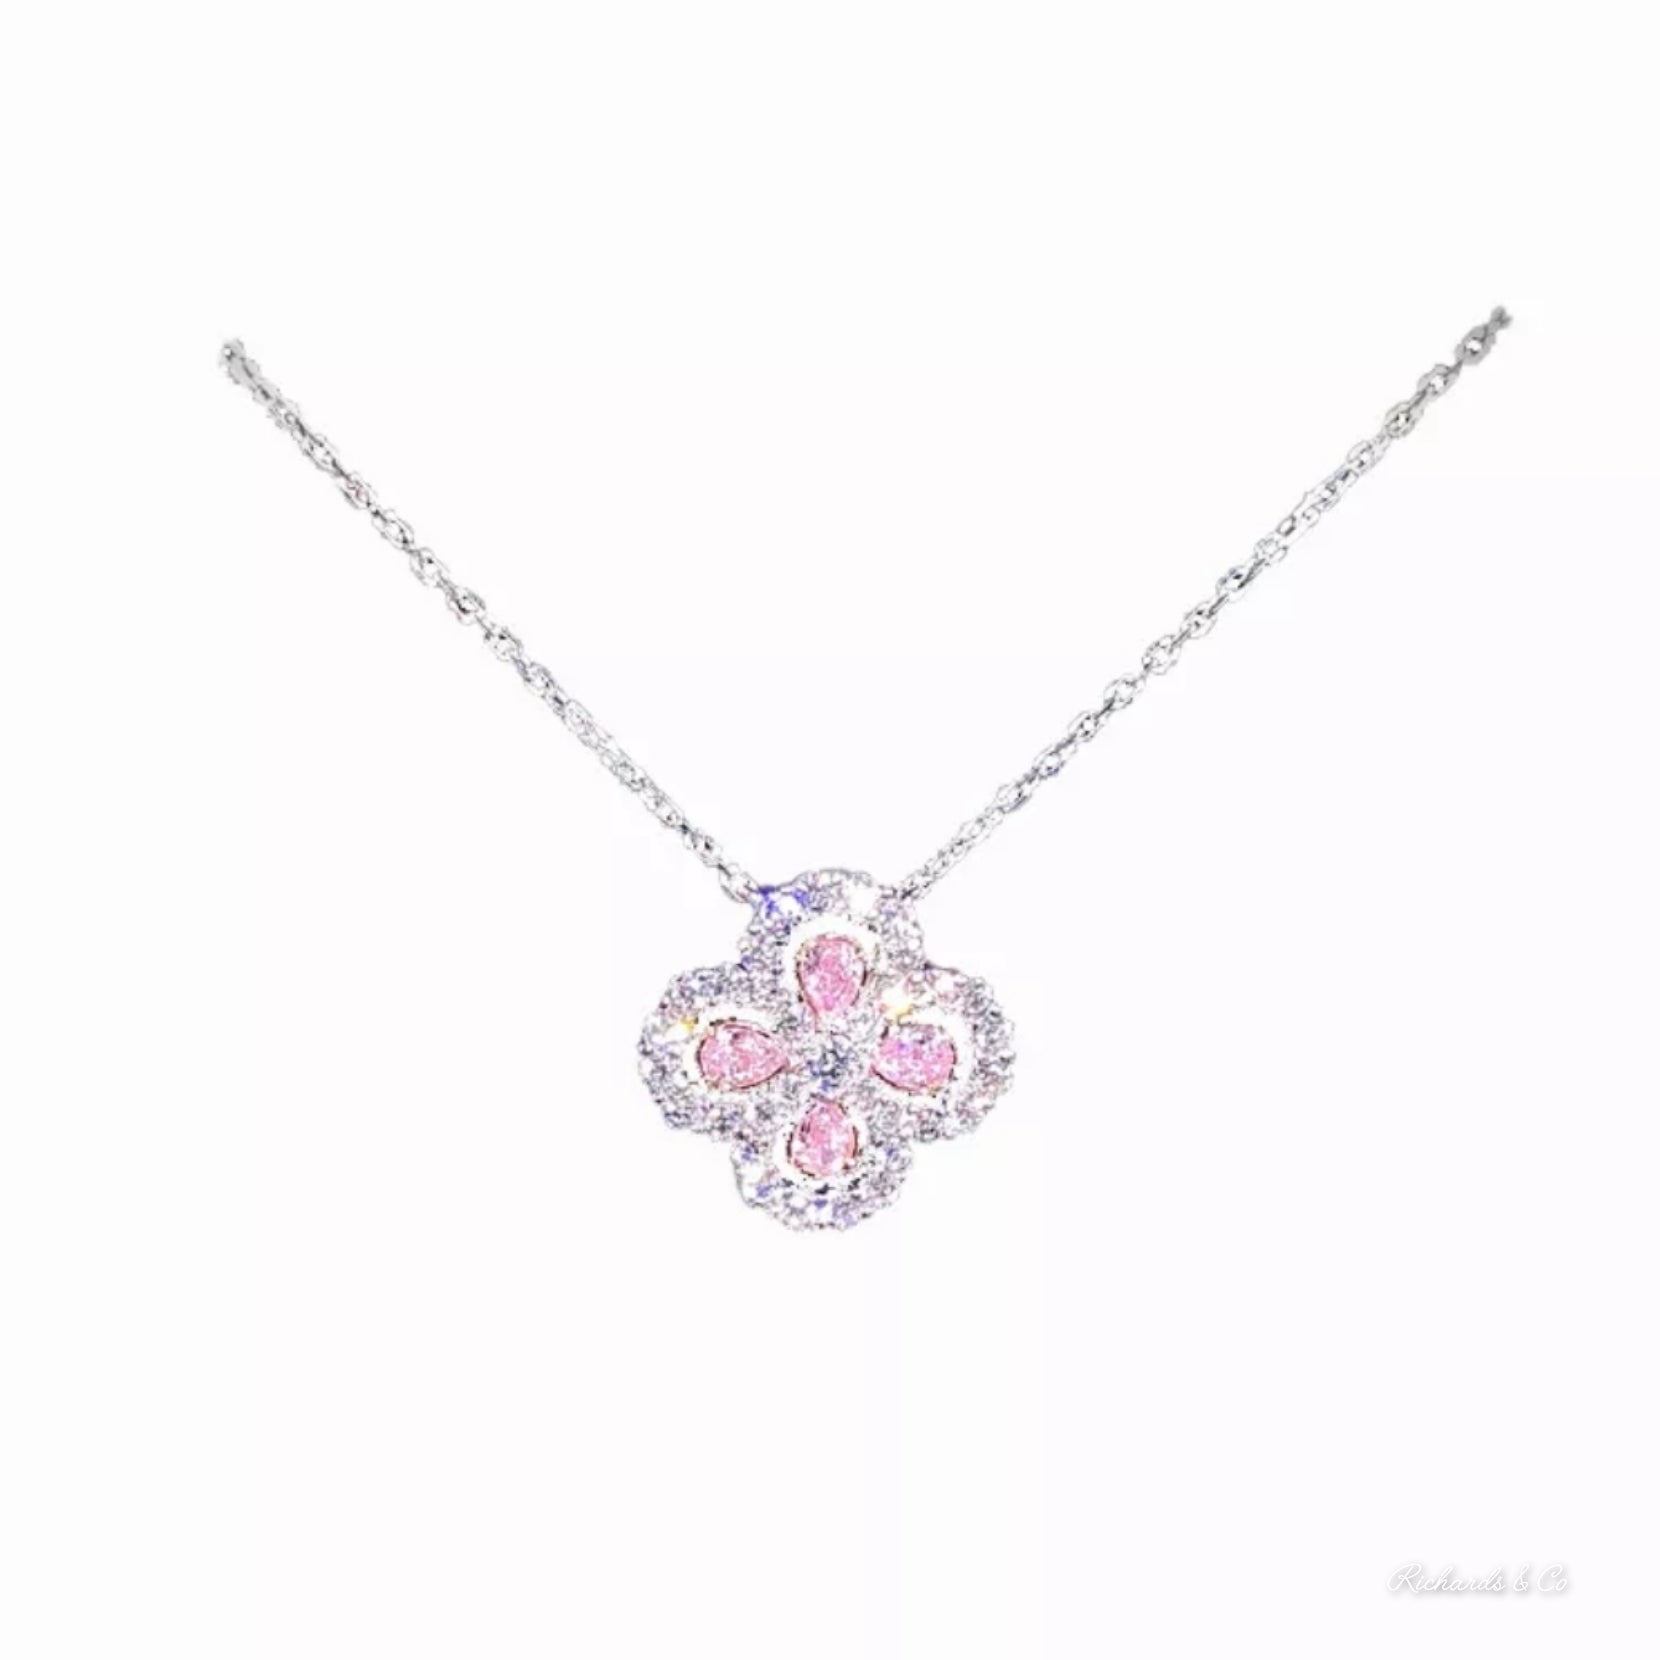 Tiffany Lock Medium Pendant in Rose Gold with Pink Sapphires | Tiffany & Co.